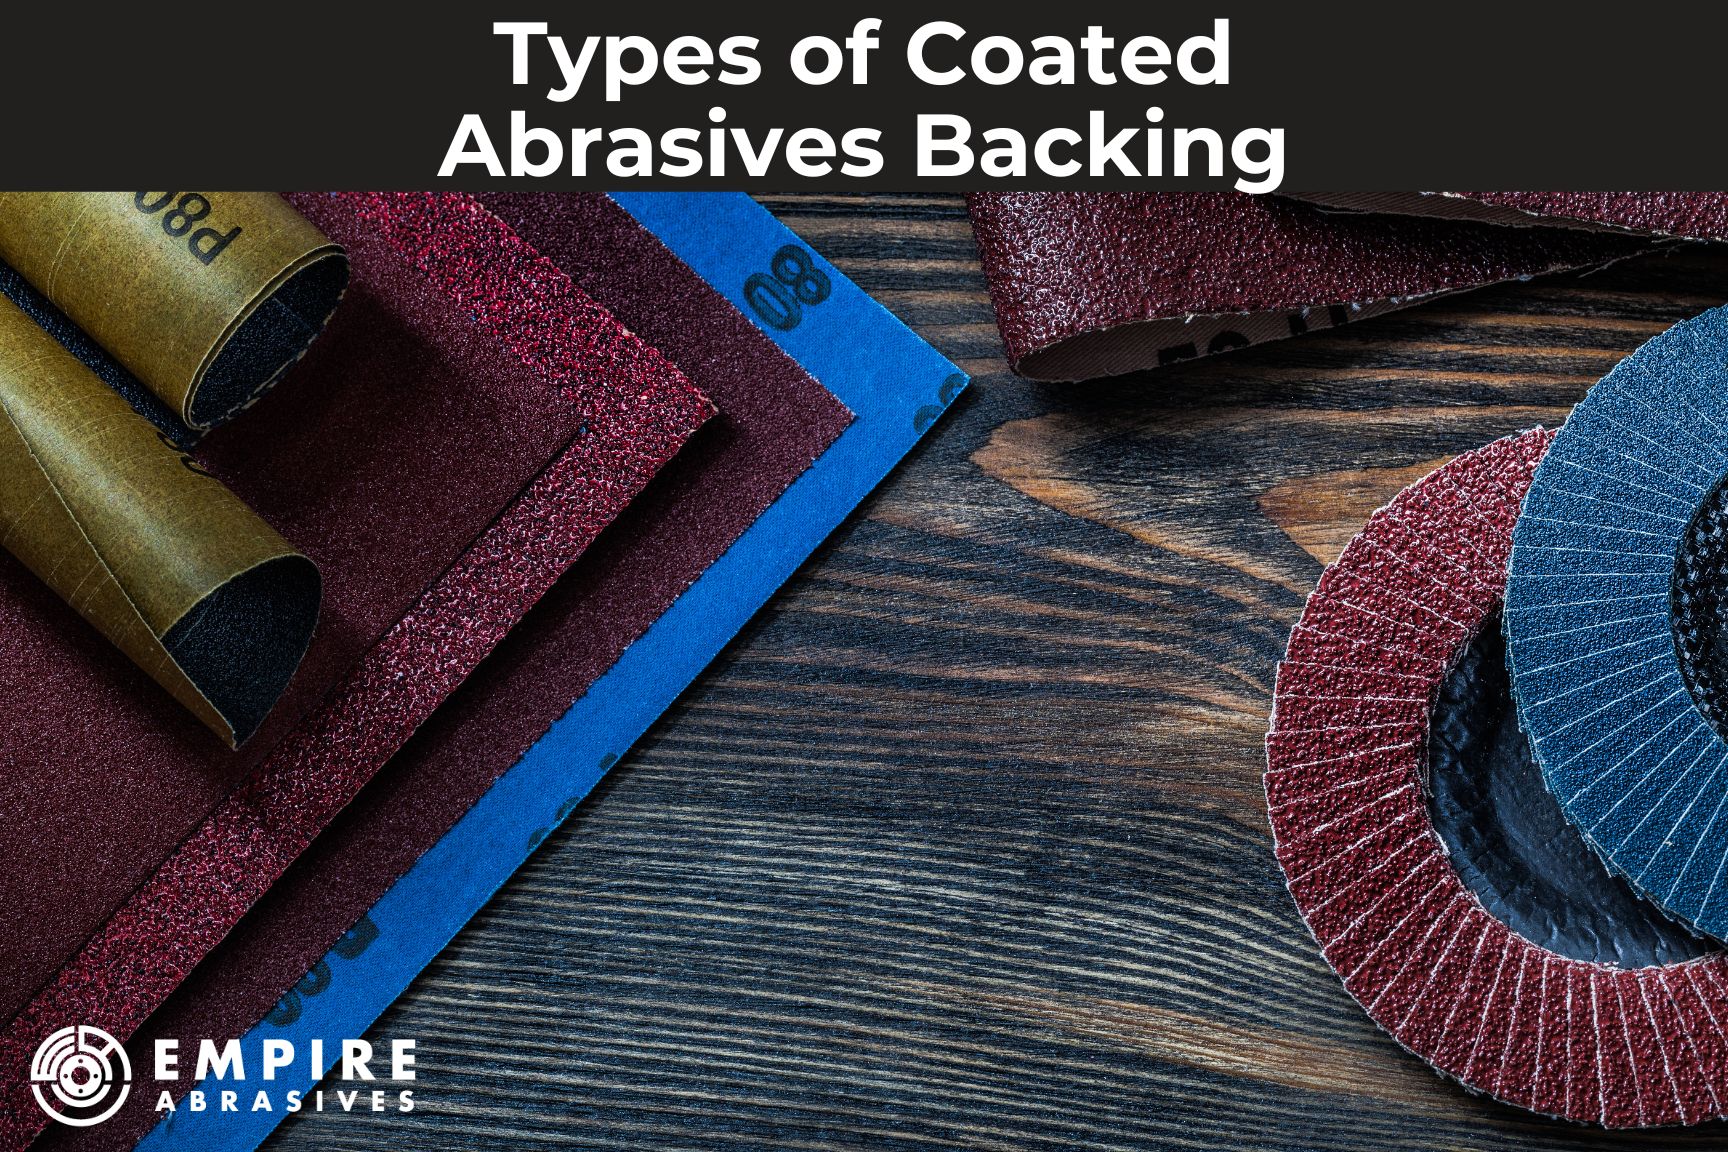 Image of various types of coated abrasive backings displayed on a wooden table. The backings include paper, cloth, film, vulcanized fiber, and non-woven materials. Each type of backing has its own advantages and disadvantages, making it suitable for different sanding and grinding applications.